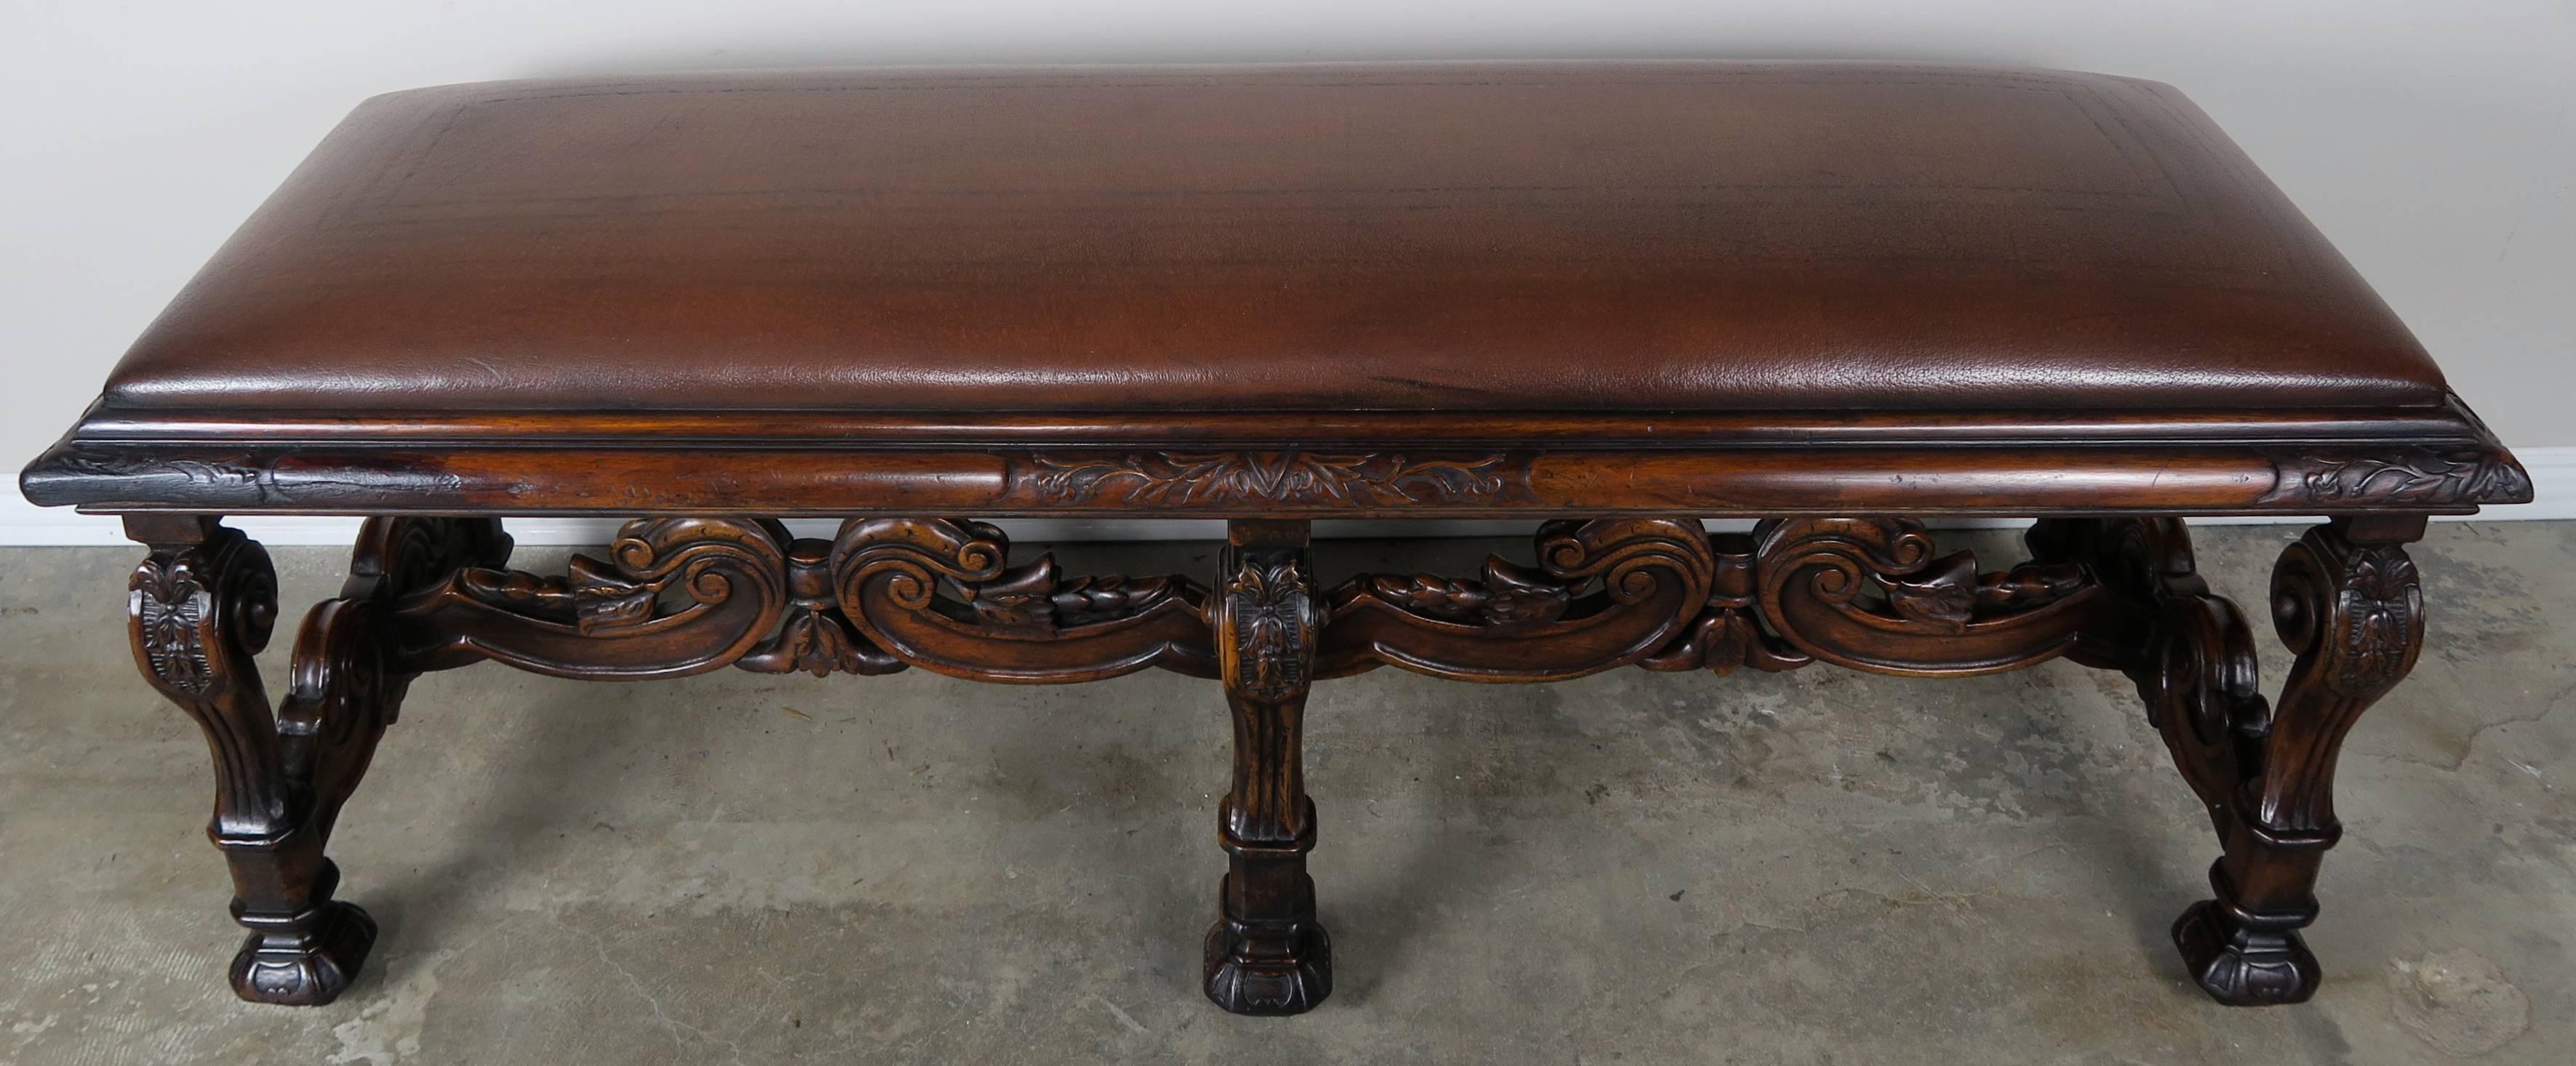 Six-legged carved English walnut embossed leather bench with floral vine detail on the corners and flowers at the top of each leg. All legs meet at beautifully carved center stretcher.